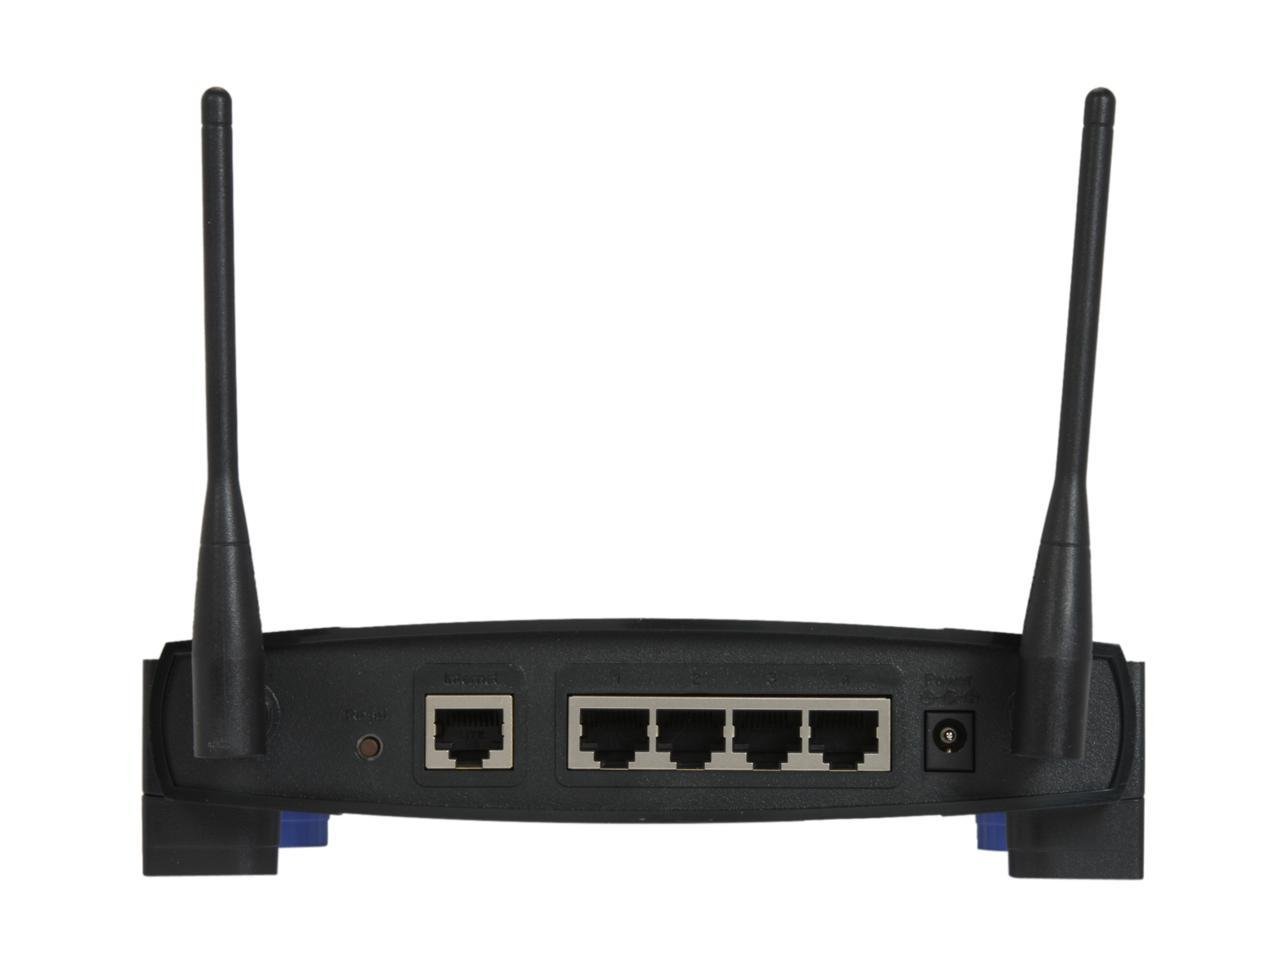 access linksys router